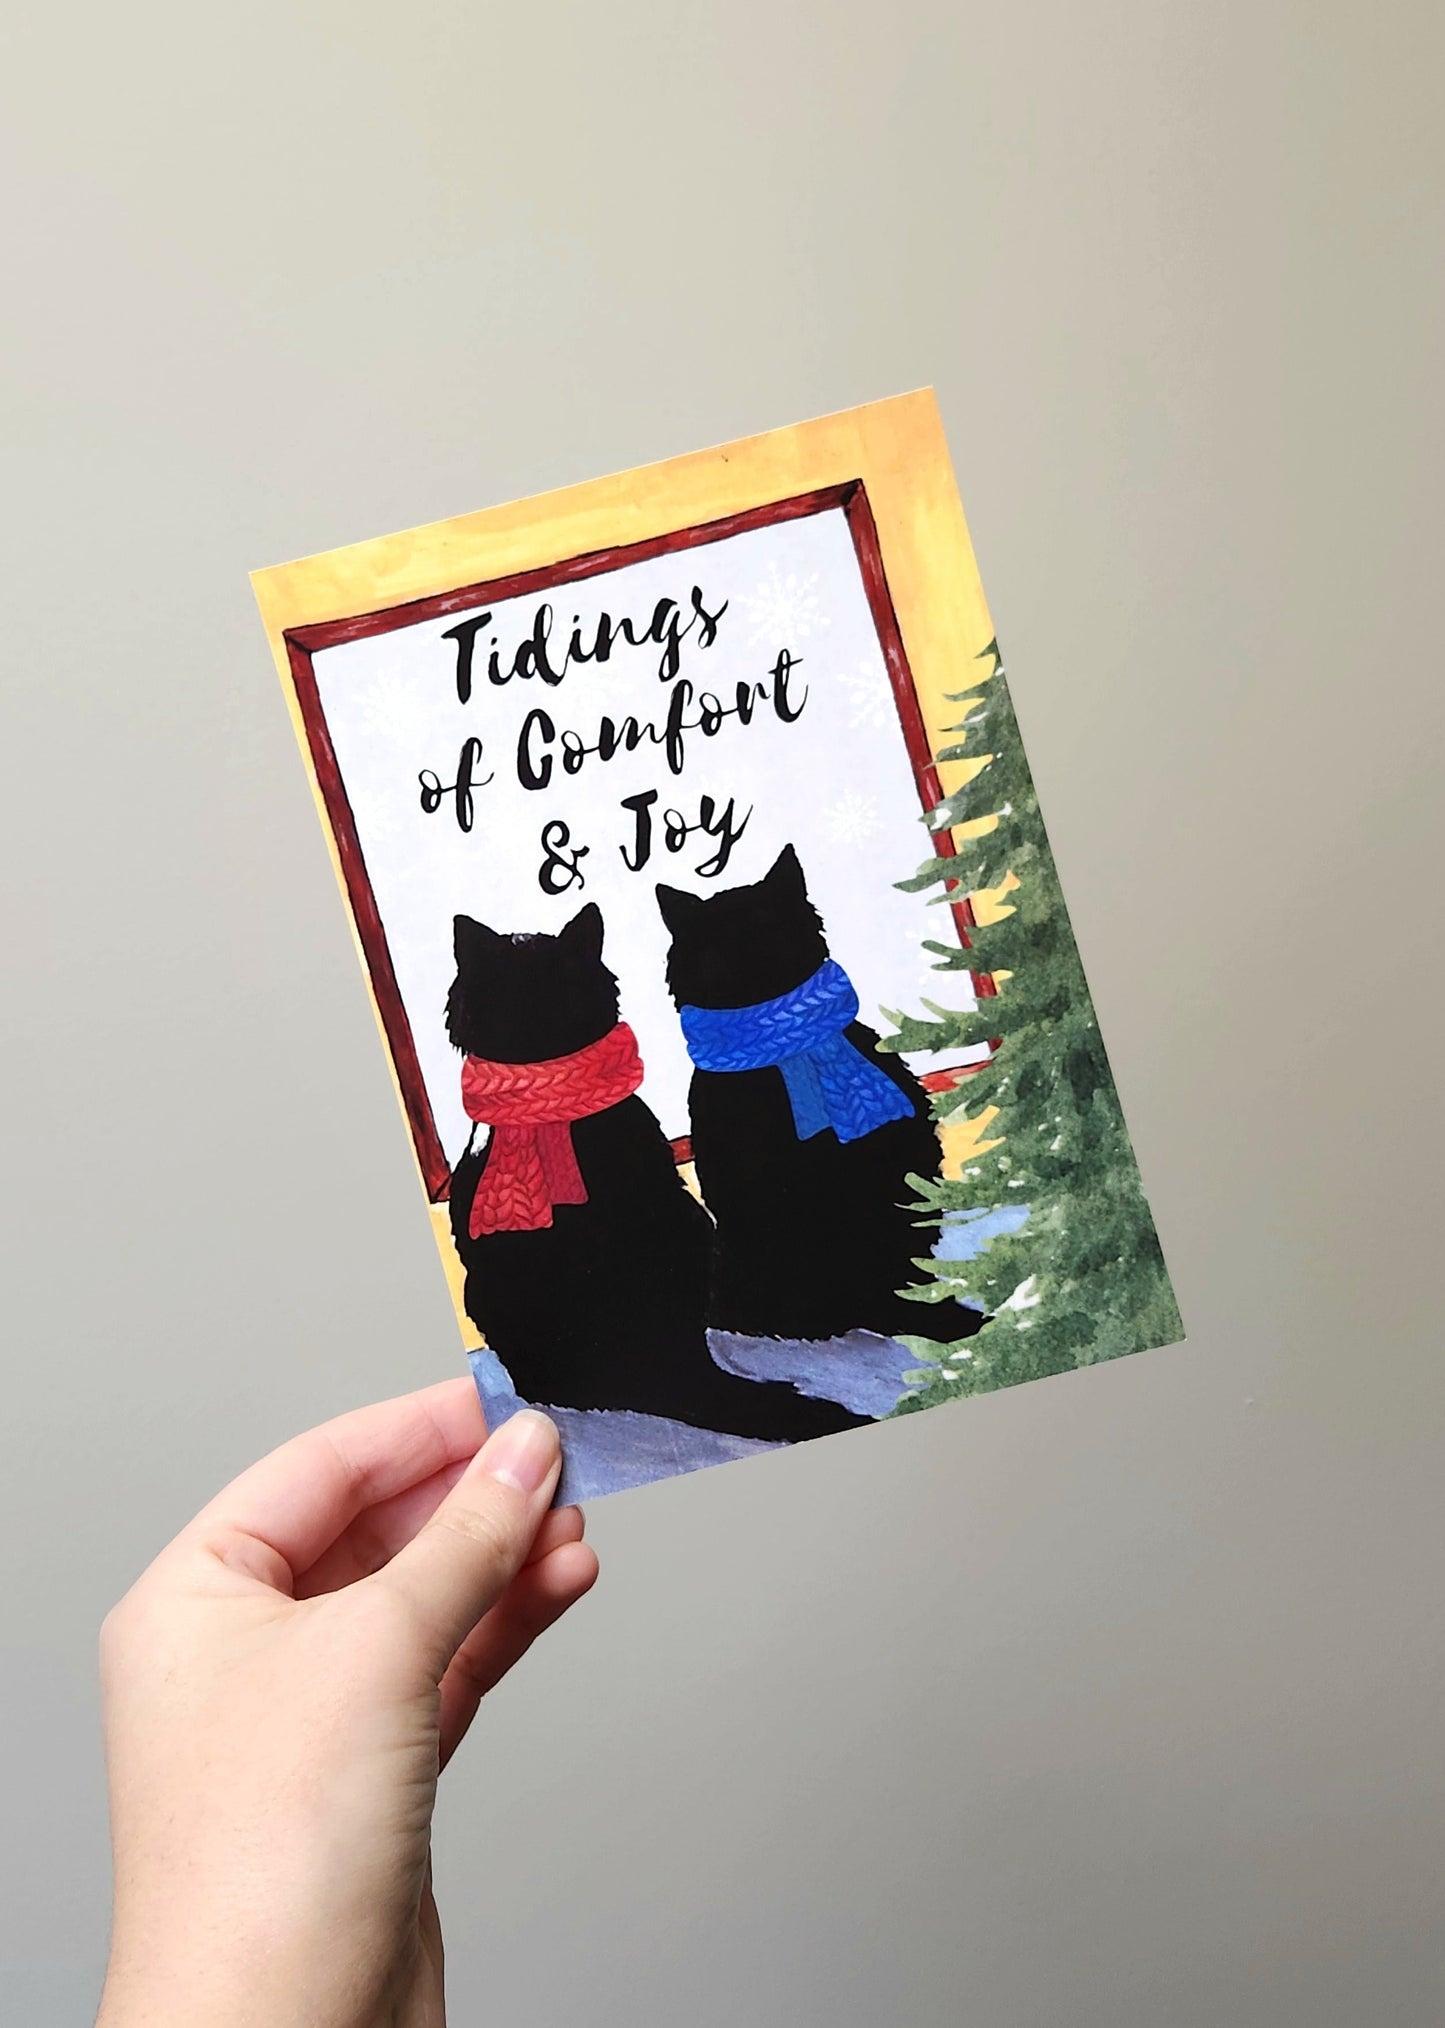 Tidings of comfort and joy, Cozy cats Christmas decor, Cats in scarves decor, Cute cat Holiday art, Cat lover gift, Meowy Christmas decor